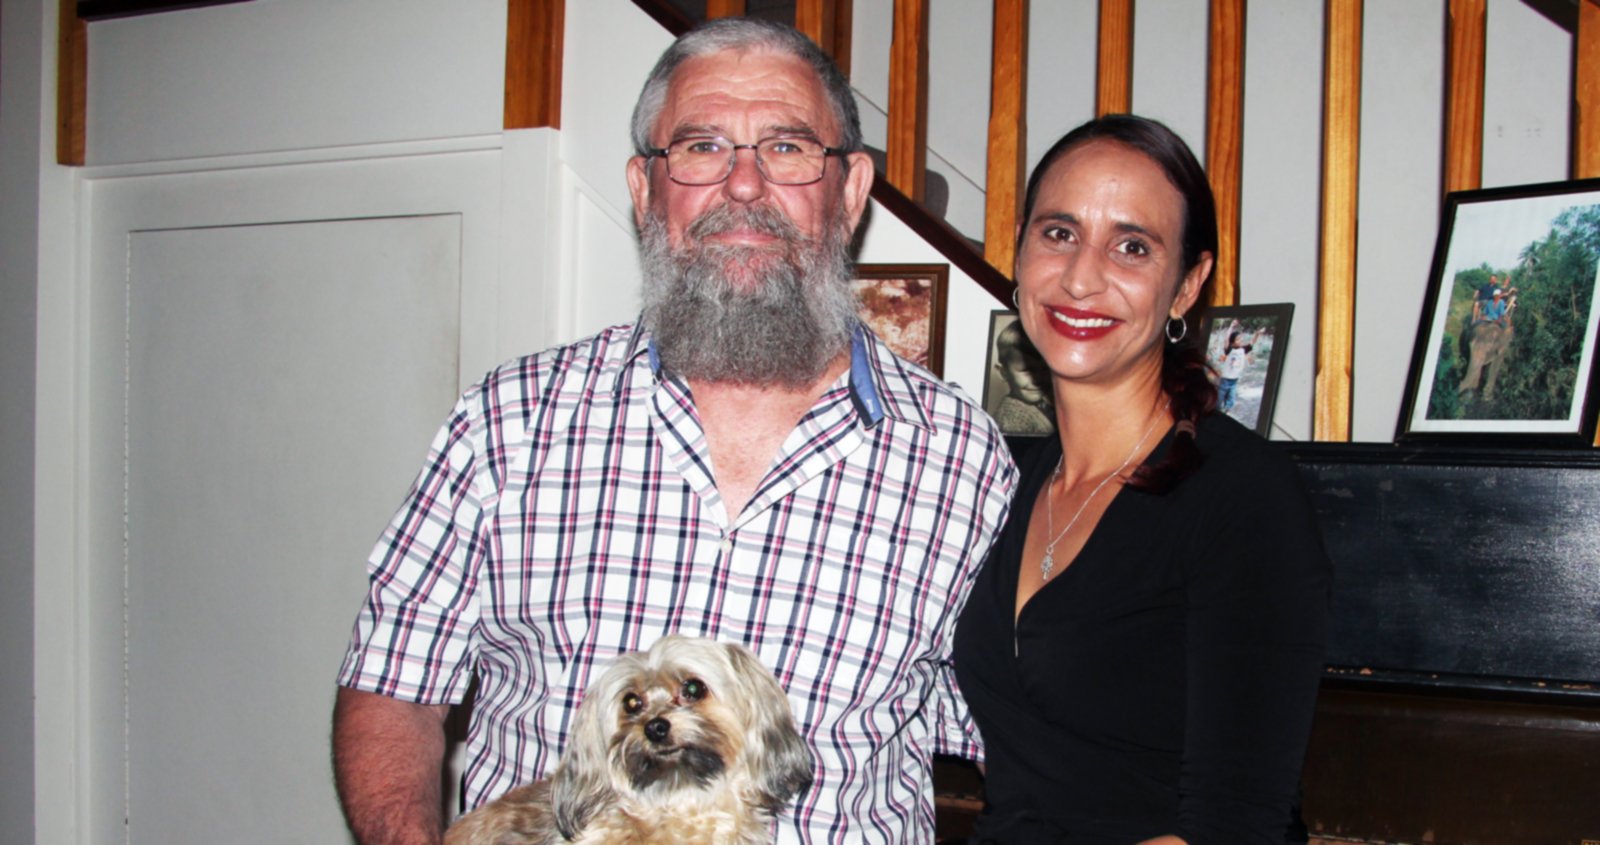 Dieter (left) with family dog on his lap, sitting next to Tammy (right).